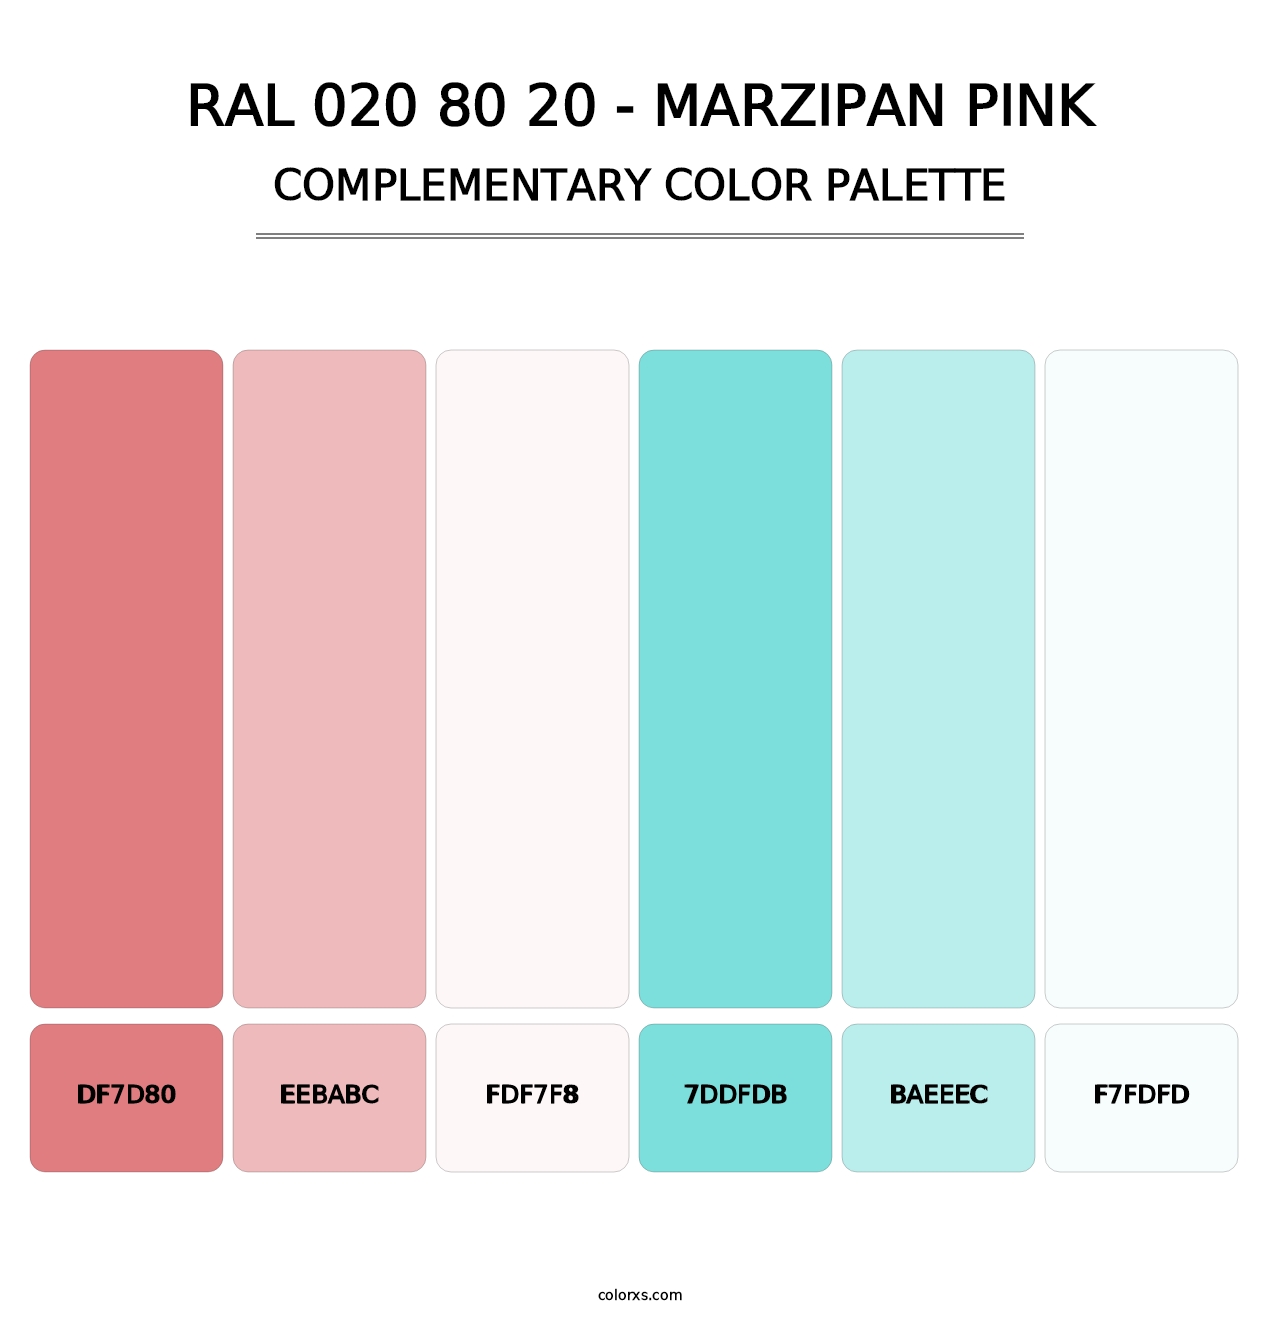 RAL 020 80 20 - Marzipan Pink - Complementary Color Palette